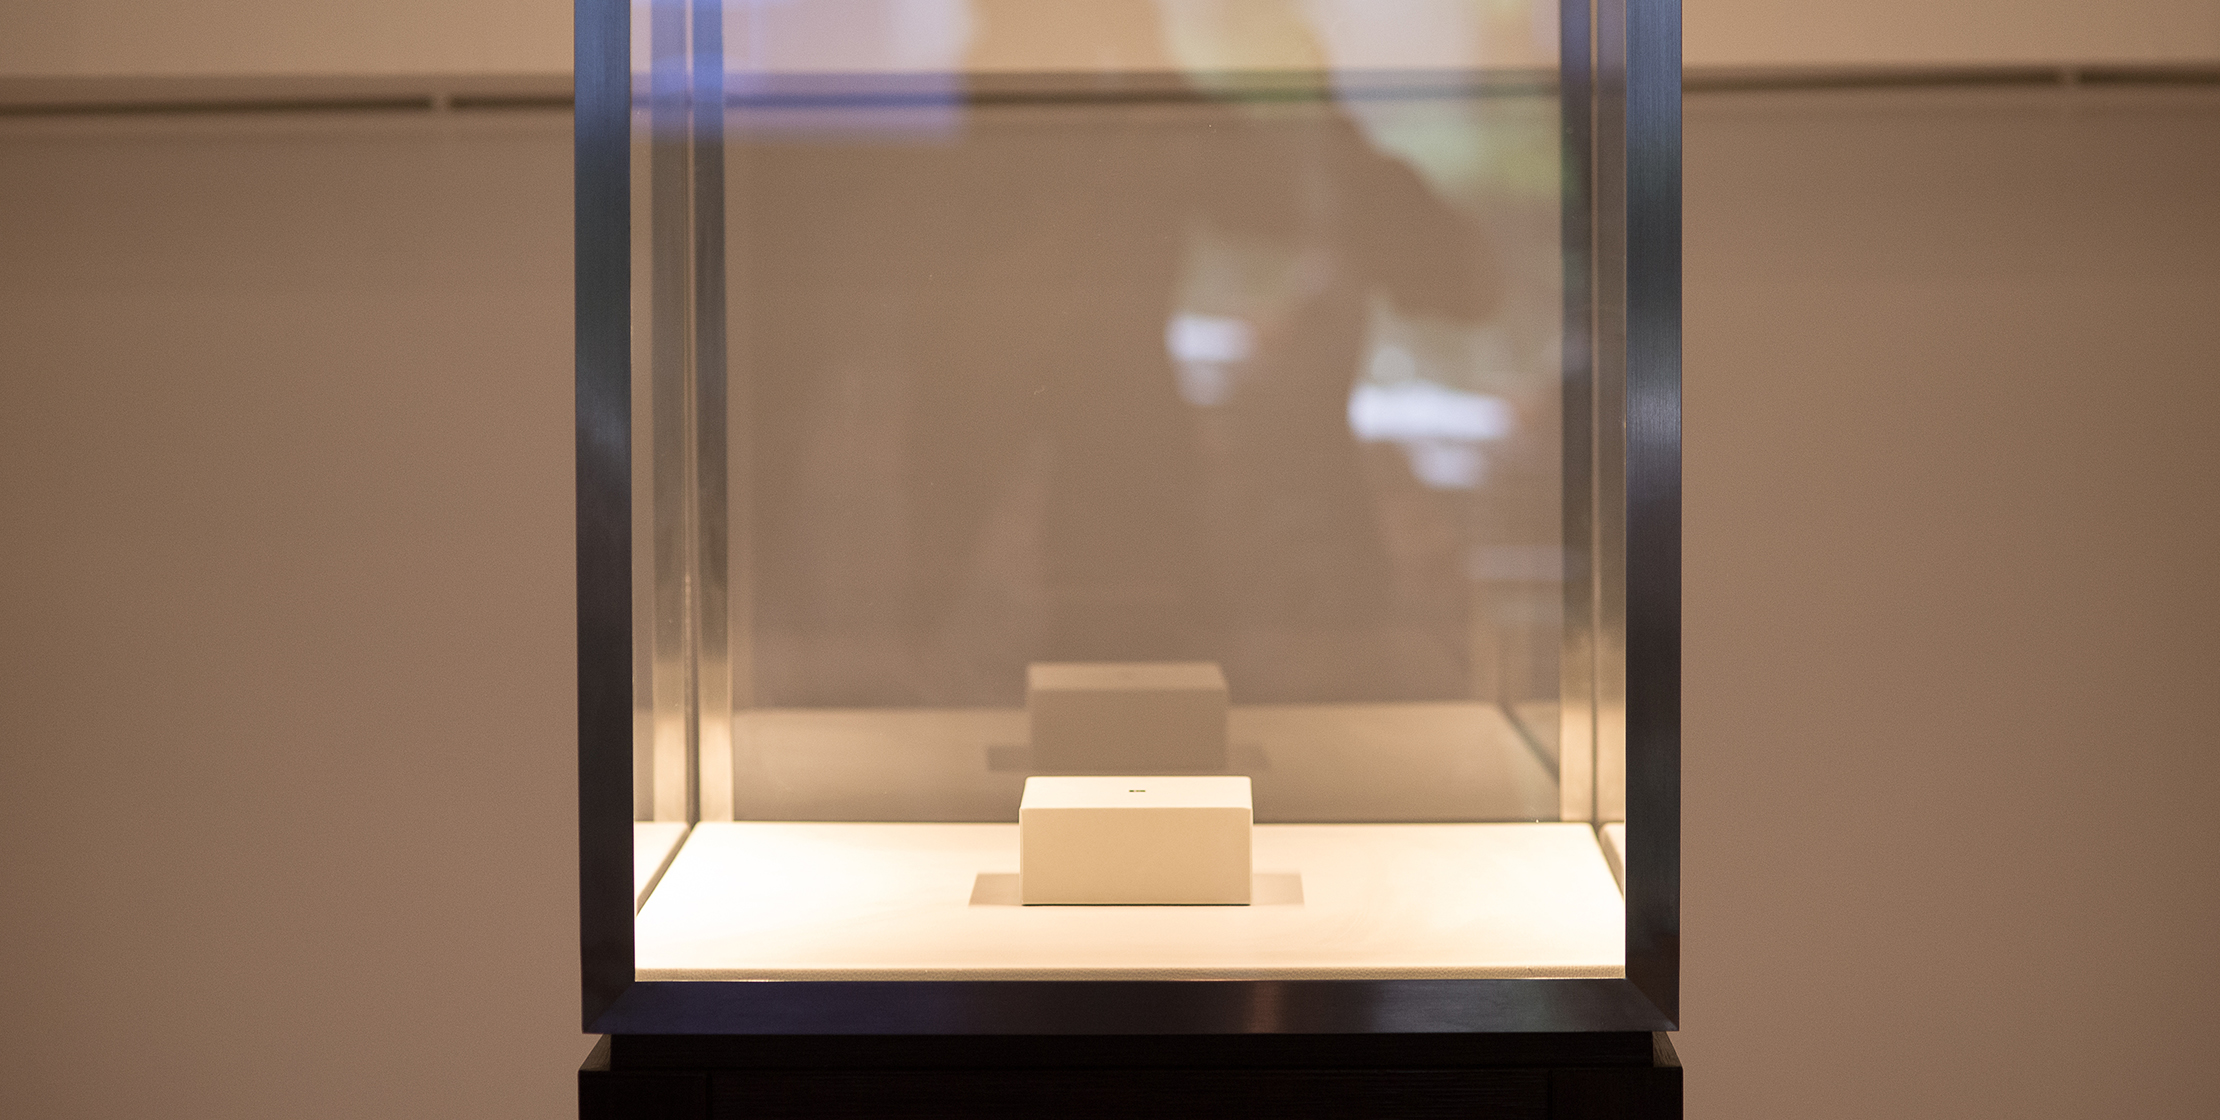 An empty display case in a museum